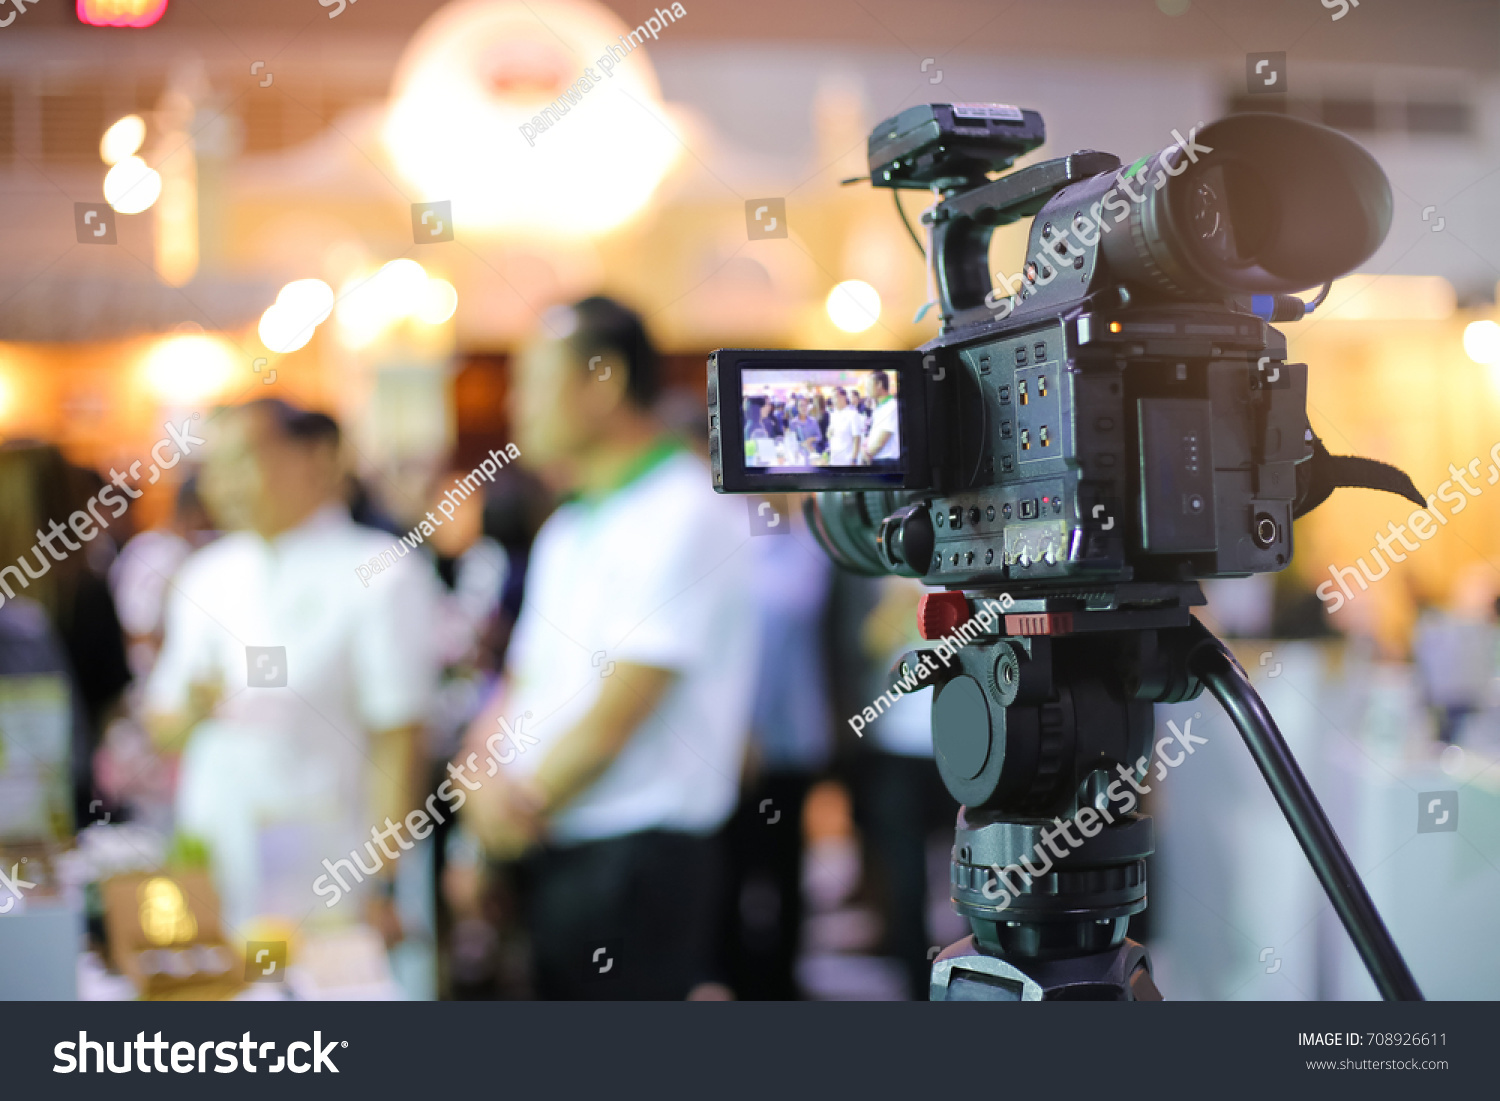 close-up of video camera fliming event #708926611